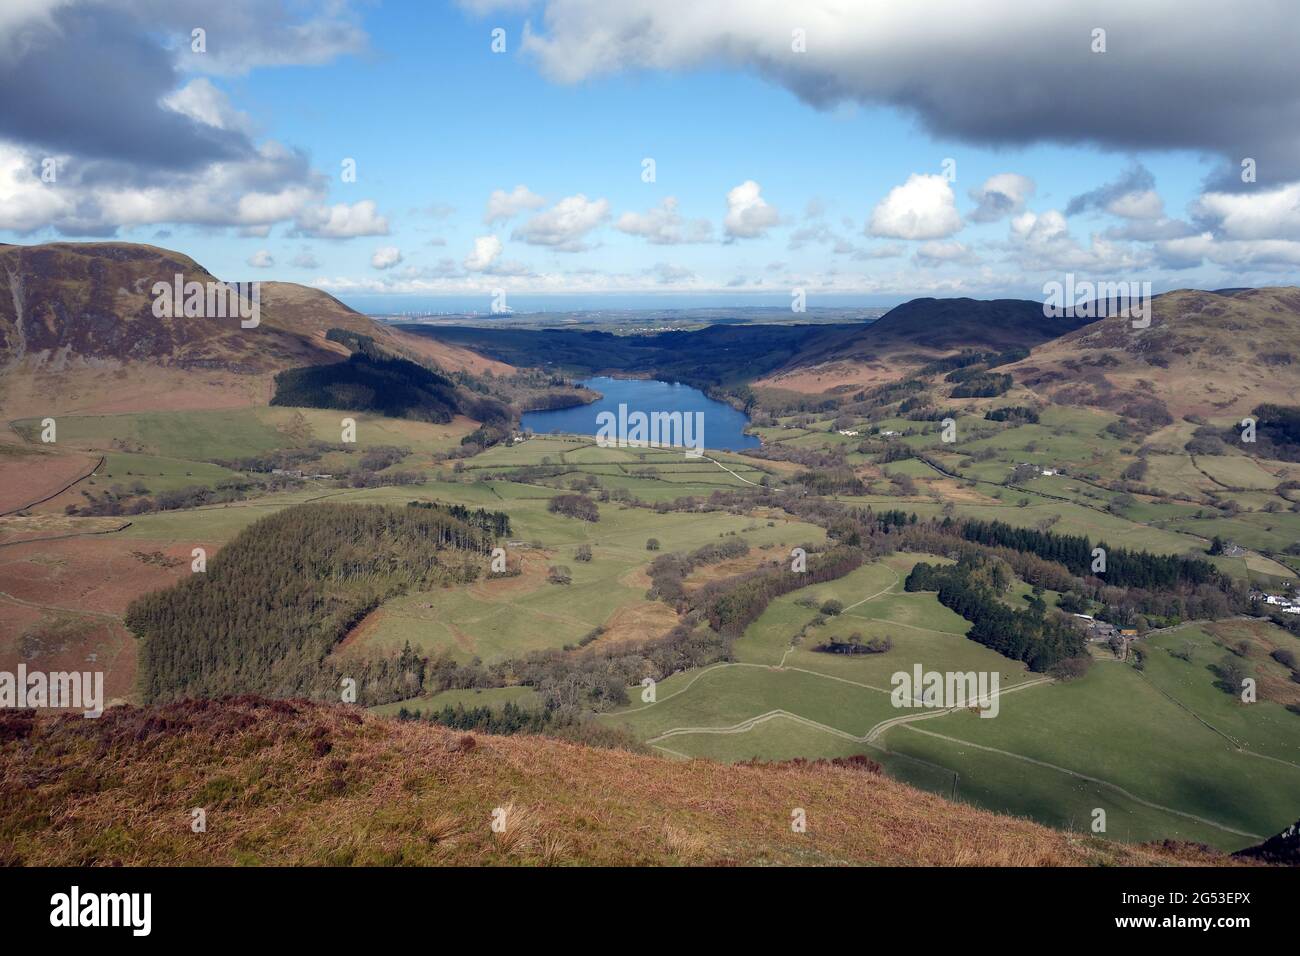 The Wainwrights Blake Fell & Carling Knott by Loweswater Lake and Darling Fell, & Low Fell in the Lake District National Park, Cumbria, England, UK Stock Photo